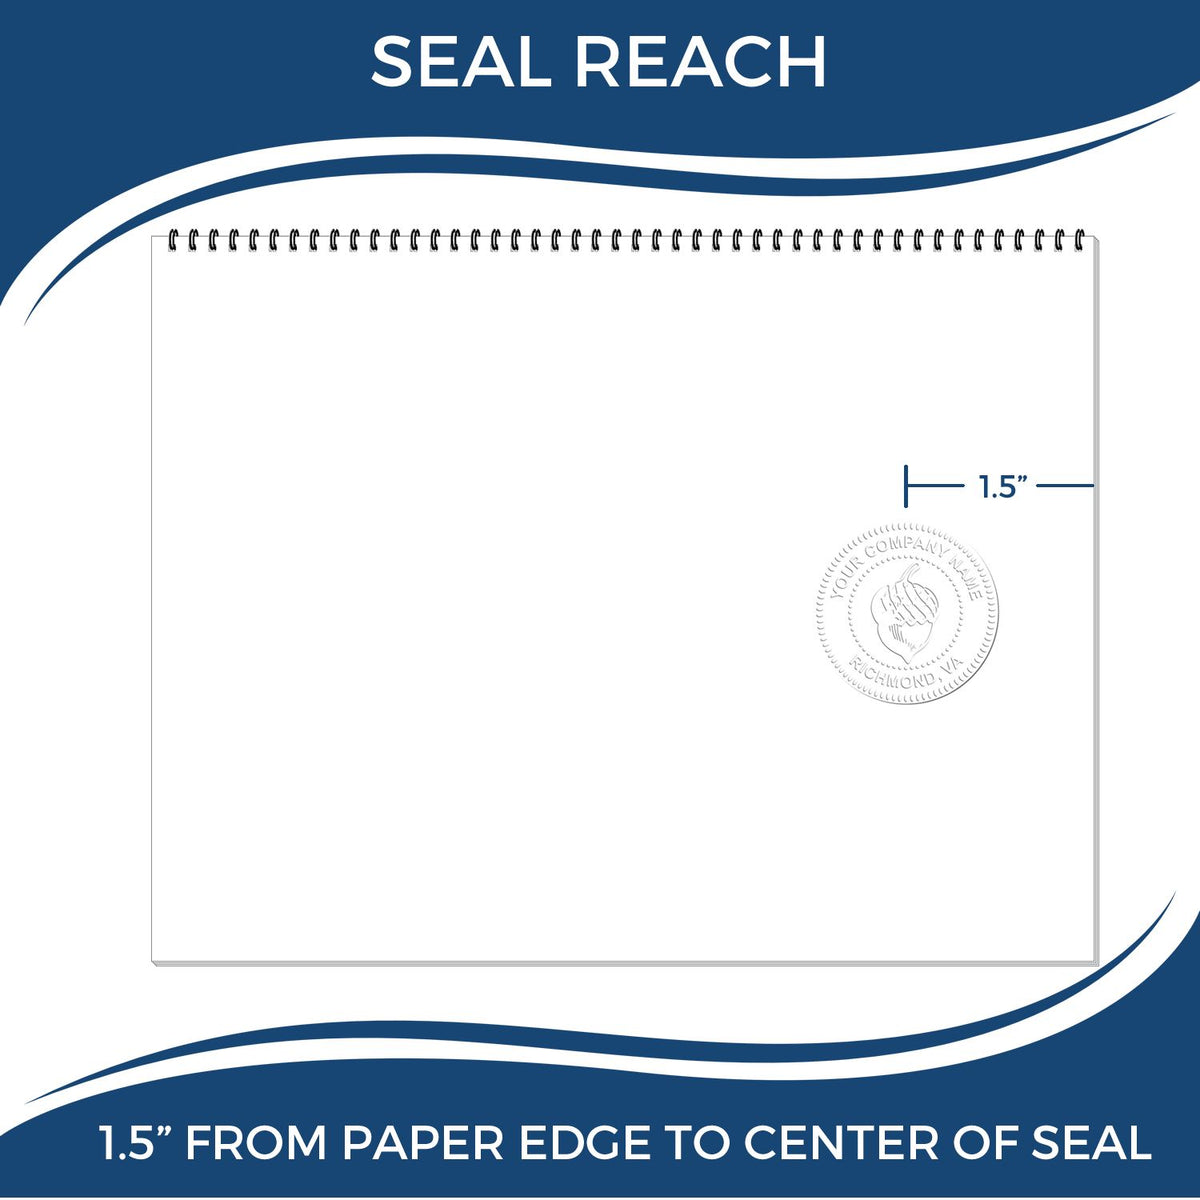 An infographic showing the seal reach which is represented by a ruler and a miniature seal image of the State of Alabama Soft Land Surveyor Embossing Seal